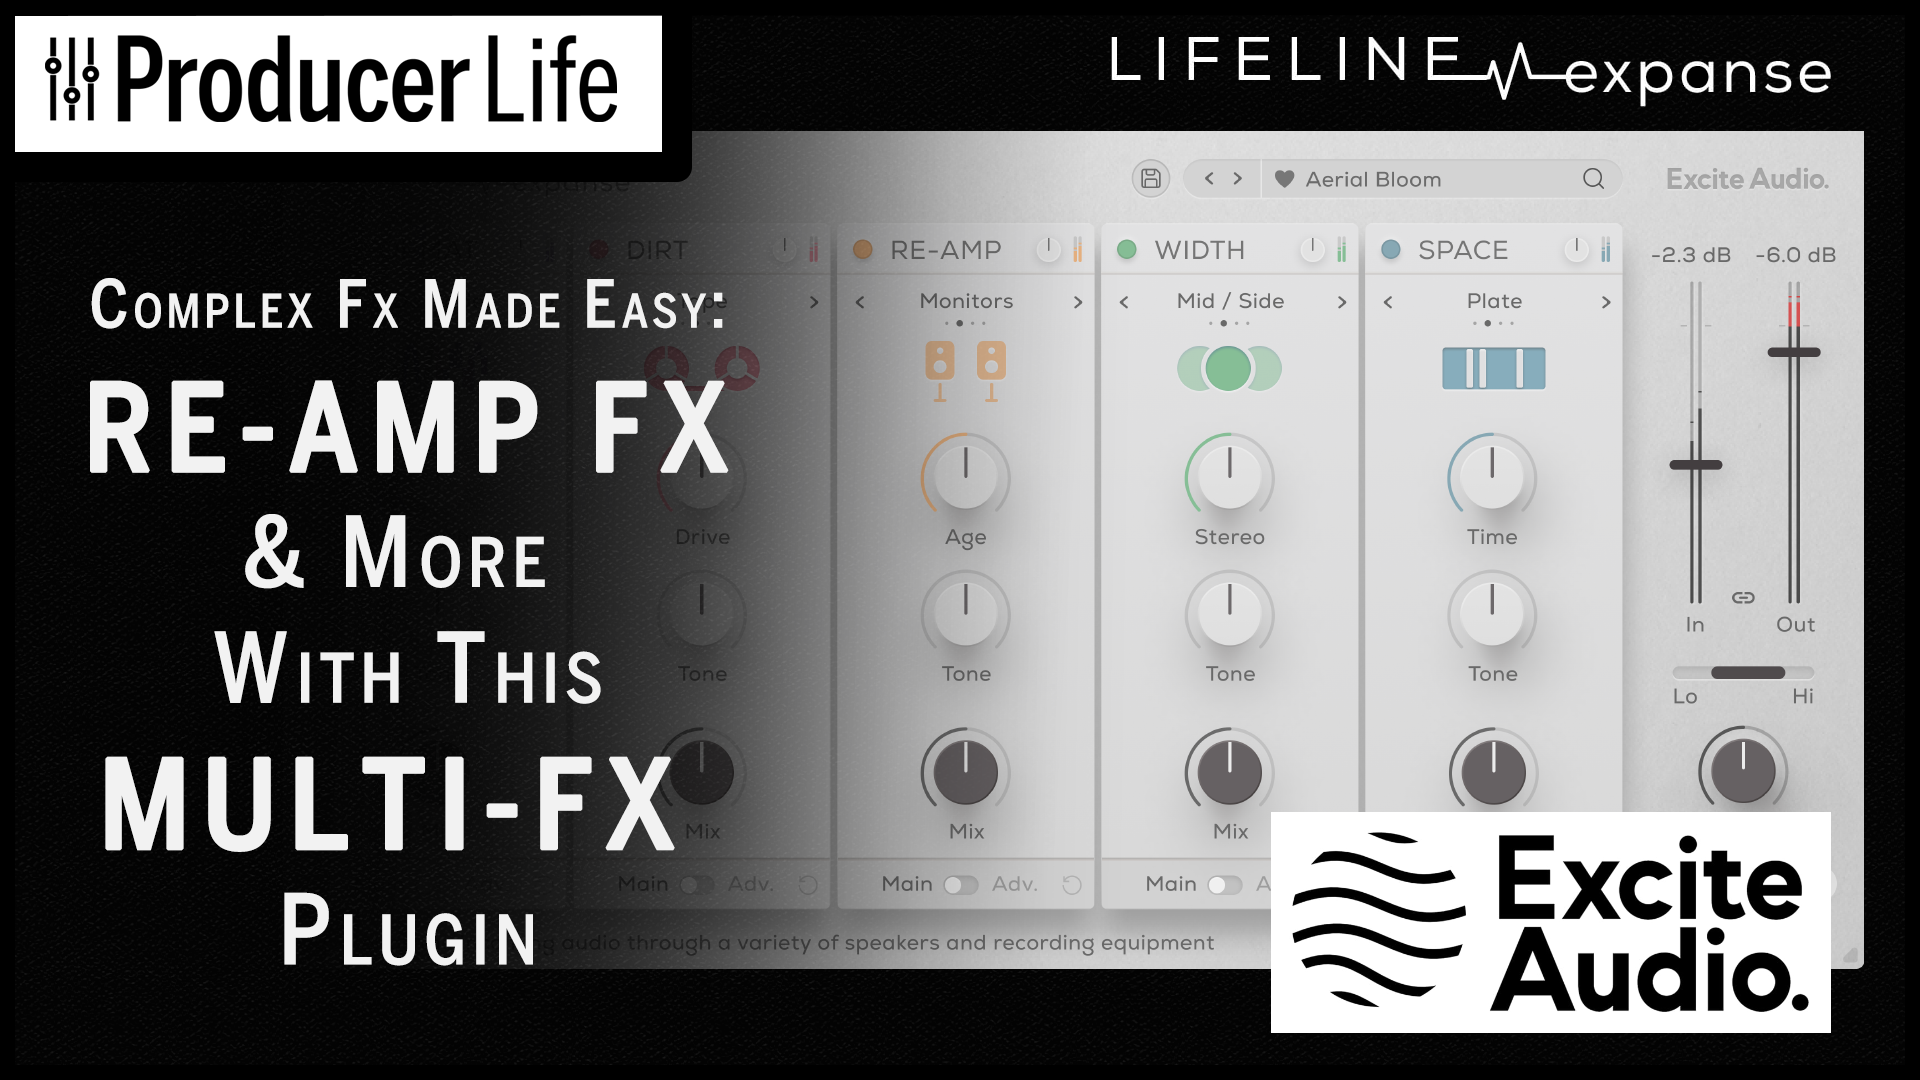 Lifeline expanse by excite audio video thumbnail for producer life